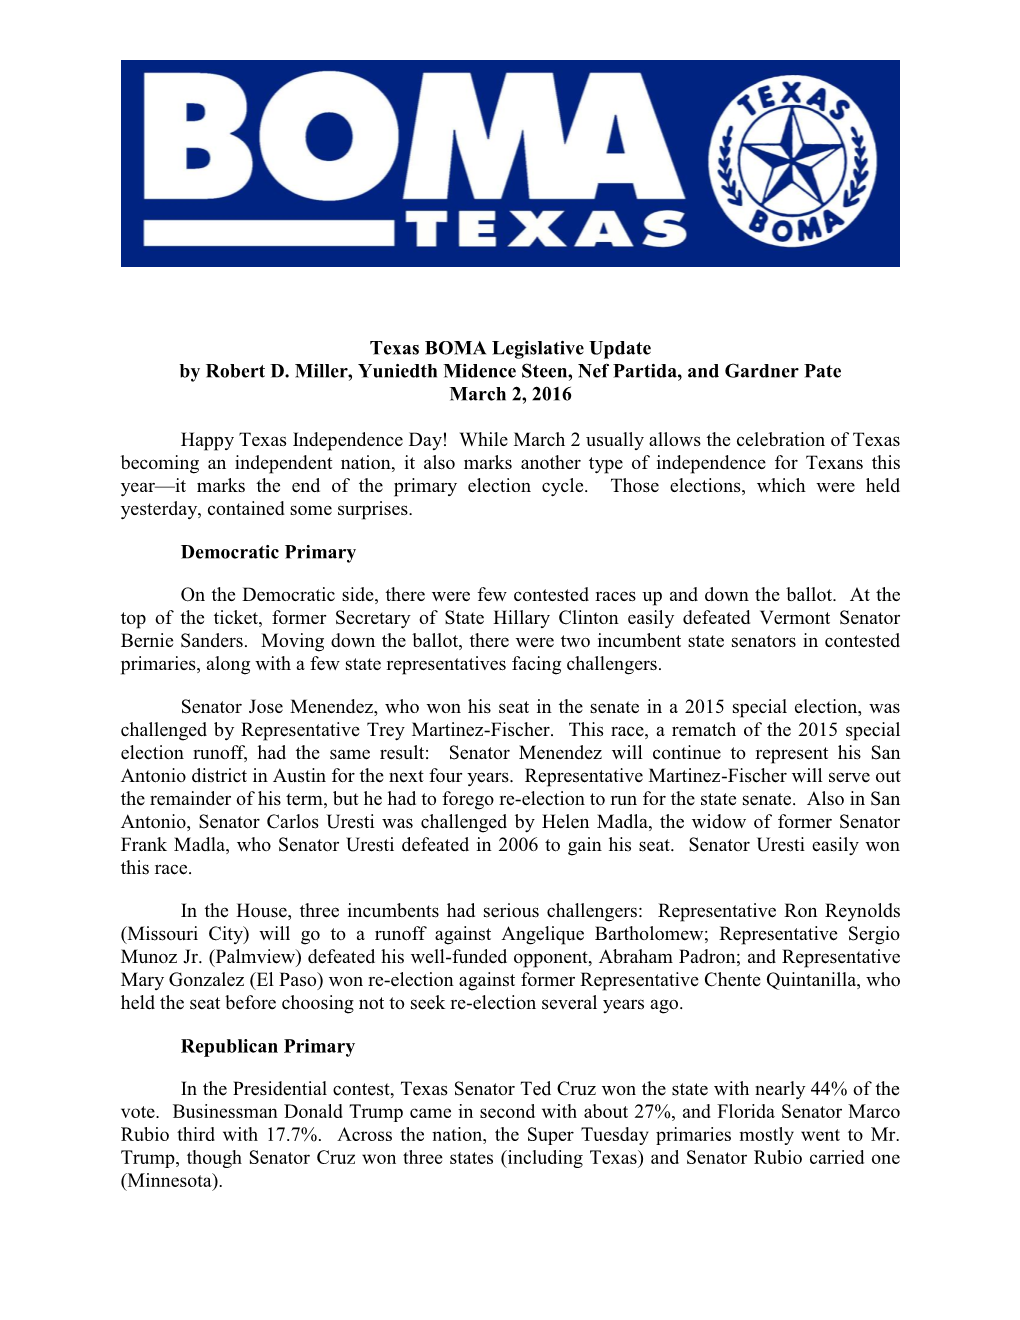 Texas BOMA Legislative Update by Robert D. Miller, Yuniedth Midence Steen, Nef Partida, and Gardner Pate March 2, 2016